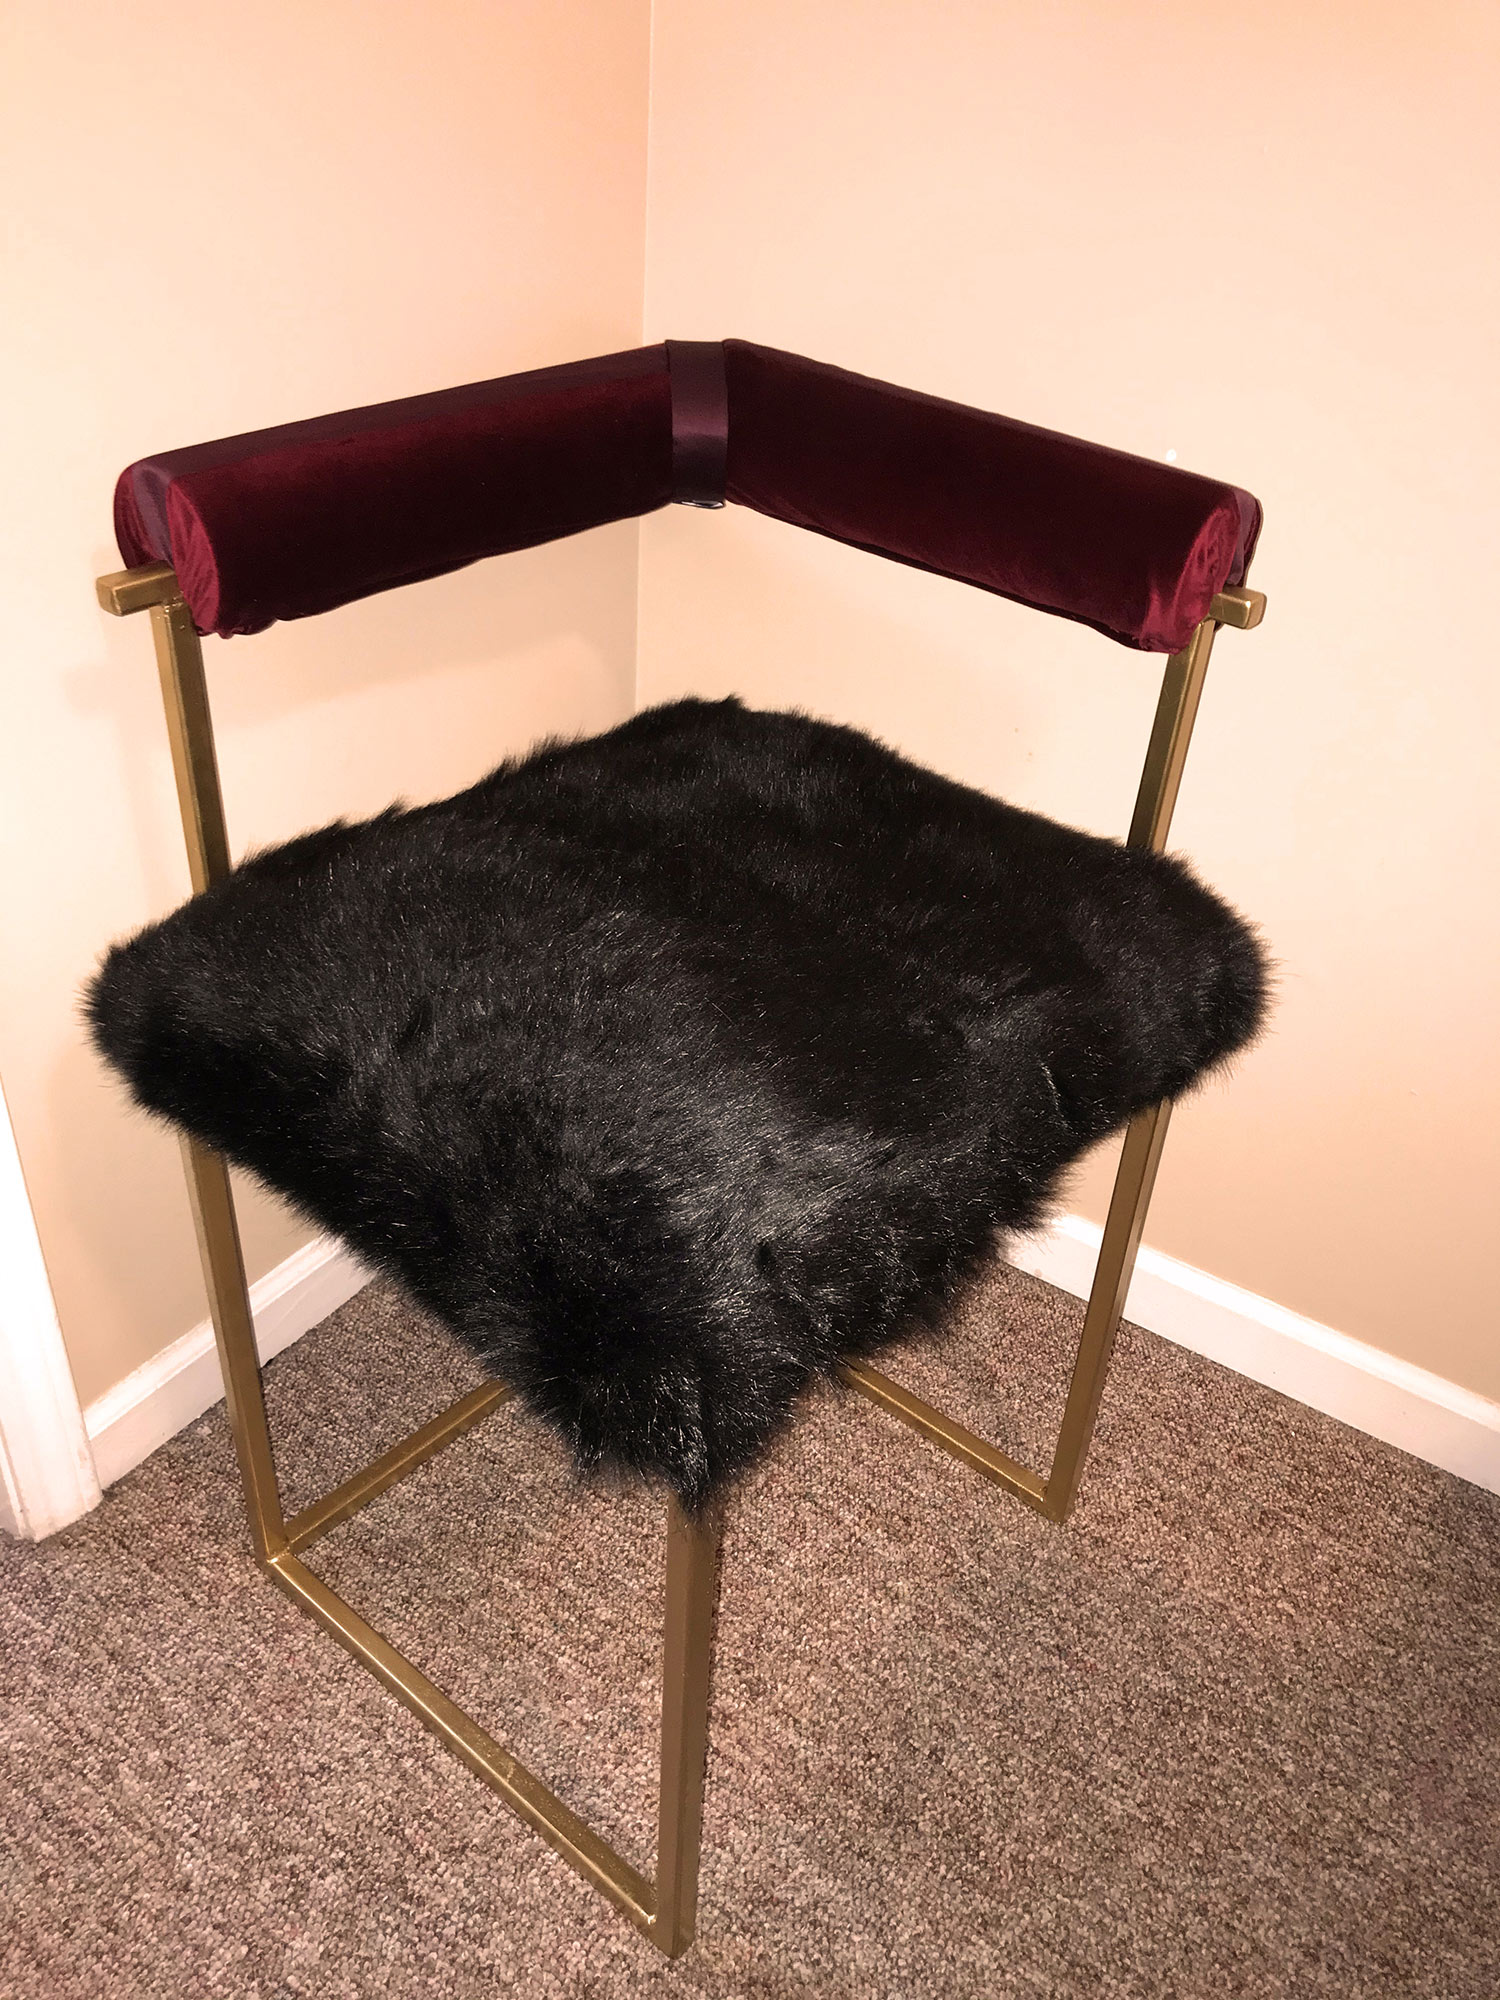 chair with gold legs and black fuzz on seat